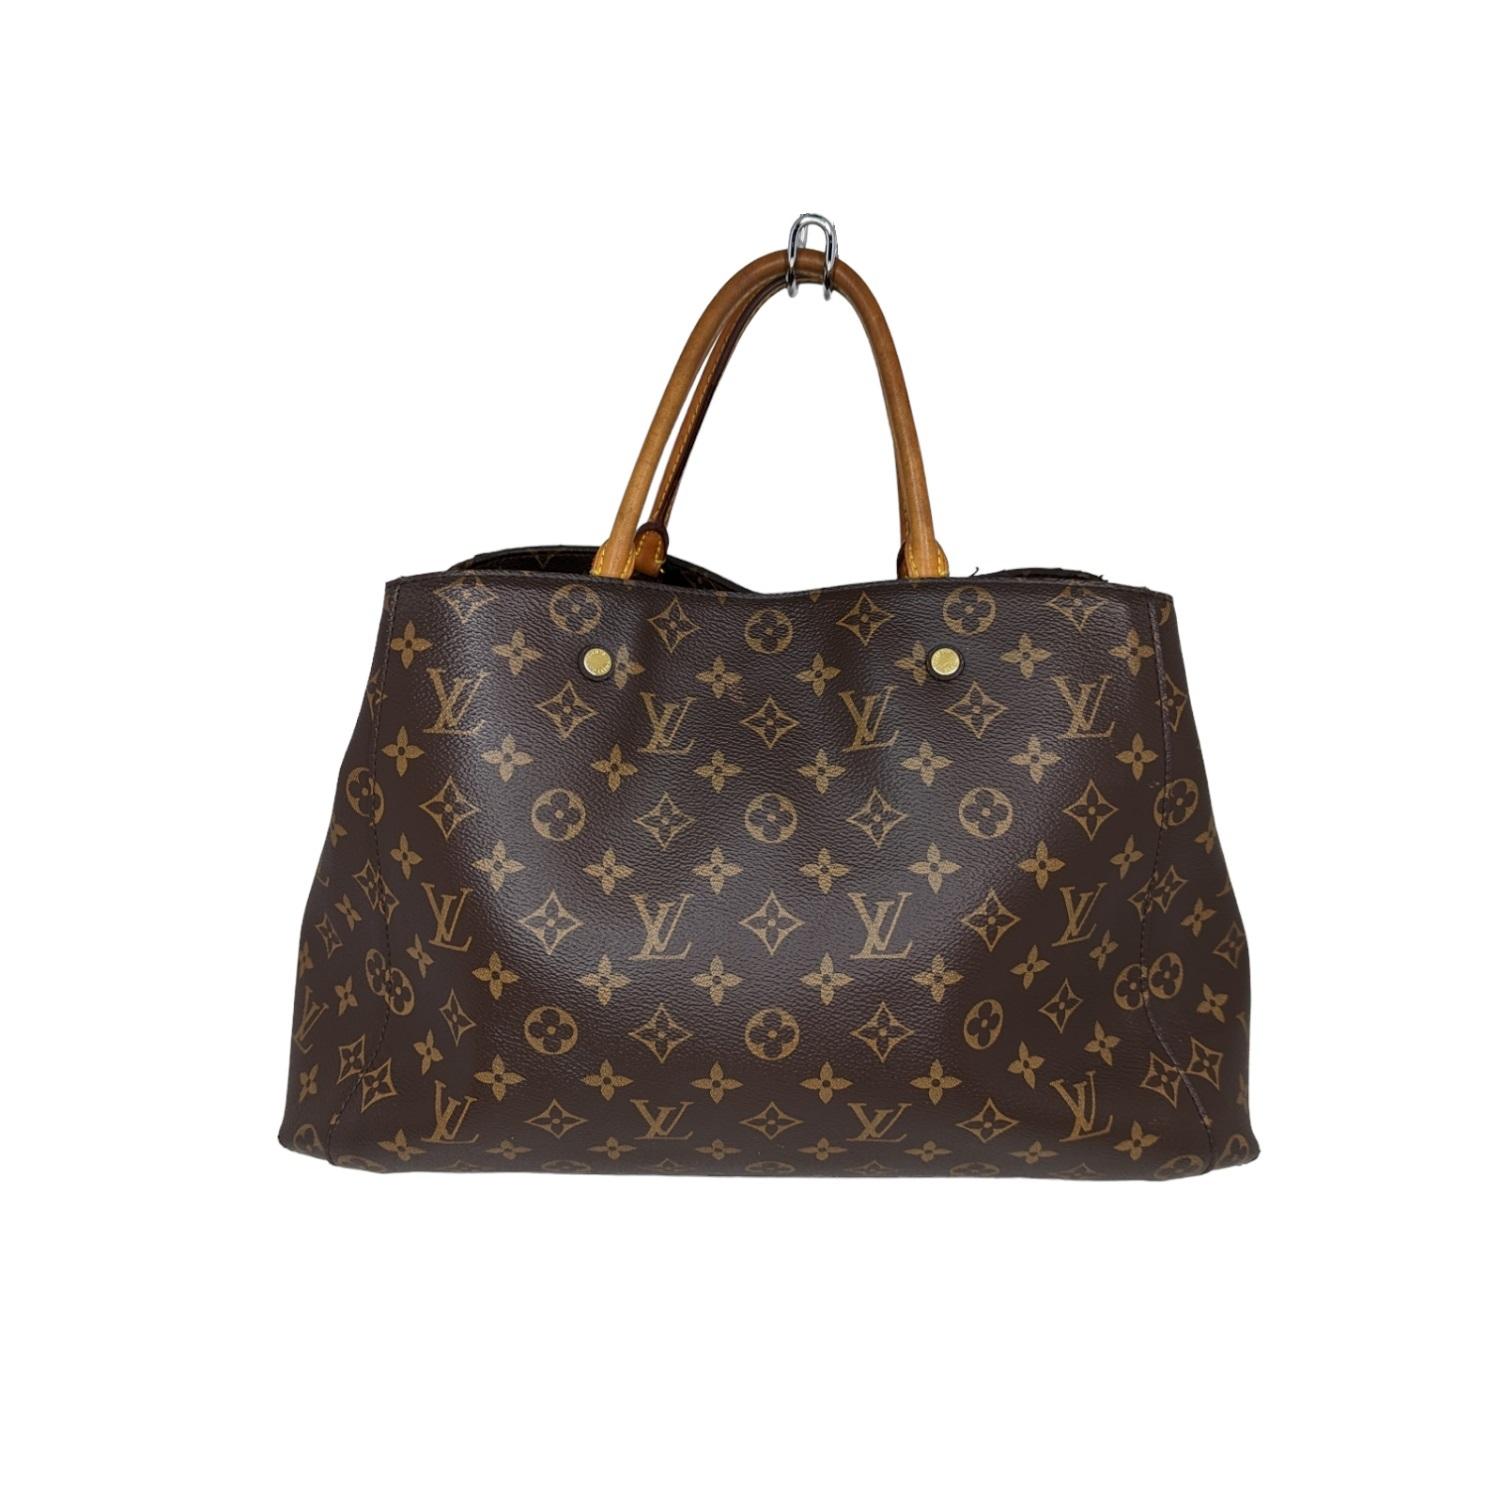 This chic tote is crafted of Louis Vuitton monogram coated toile canvas. The shoulder bag features vachetta cowhide leather rolled leather top handles with an optional monogram canvas shoulder strap complemented with polished brass clasps. The top